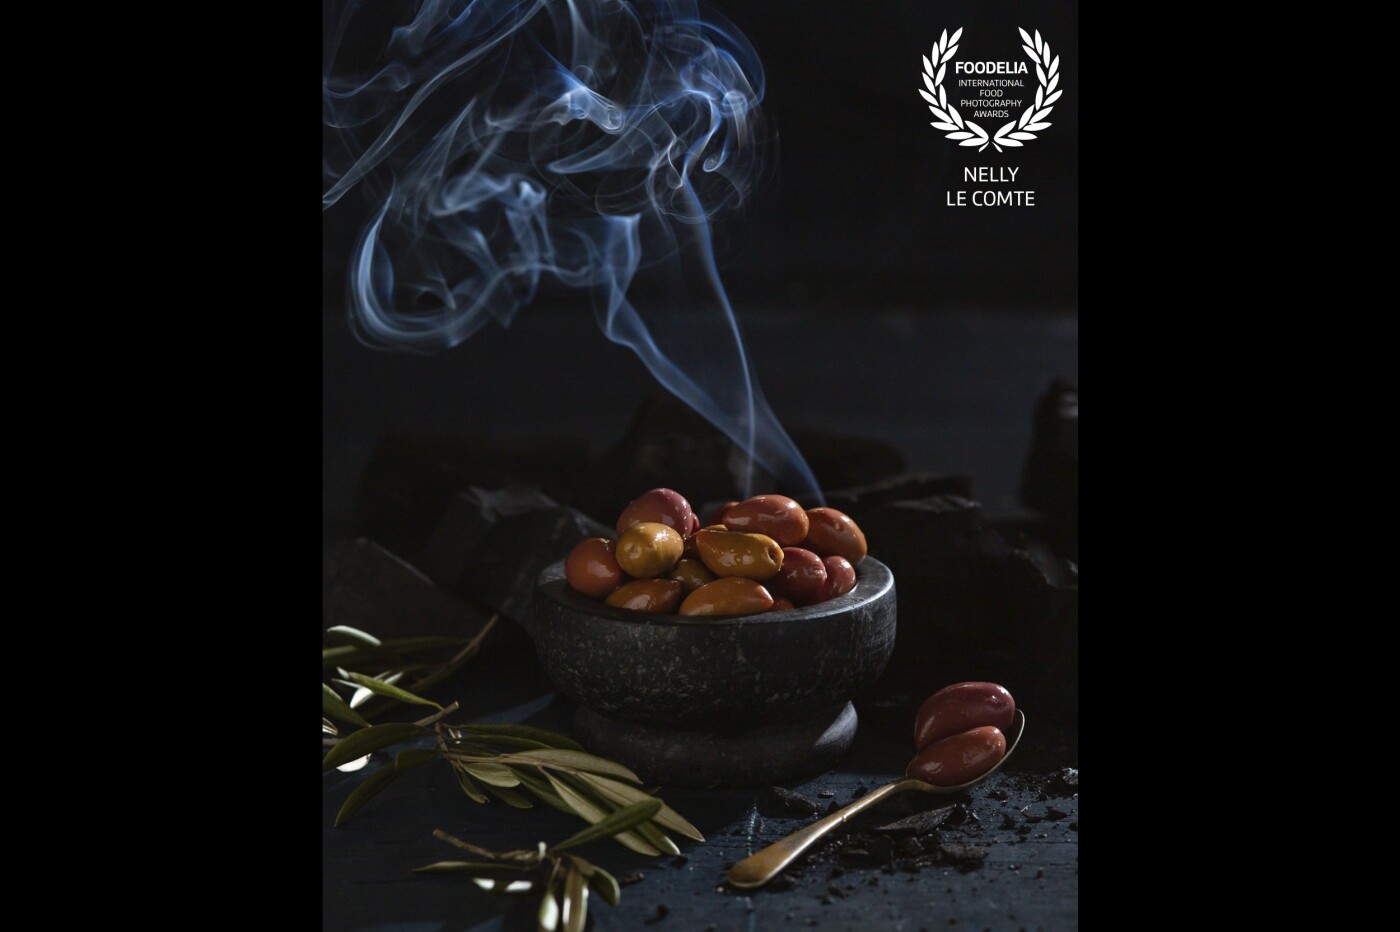 Kalamata and Manzanilla olives, hand smoked over cherry wood on @grumpygrandmas farm, giving them a rich, smokey flavor. We ate quite a few during the shoot as they are so moorish!<br />
Photographed in my studio where I like to balance studio light and natural light. Playing with shutter-speeds to get the right amount of smoke. Food styling by @foodstylist_pete_may and art direction by @tinabyron